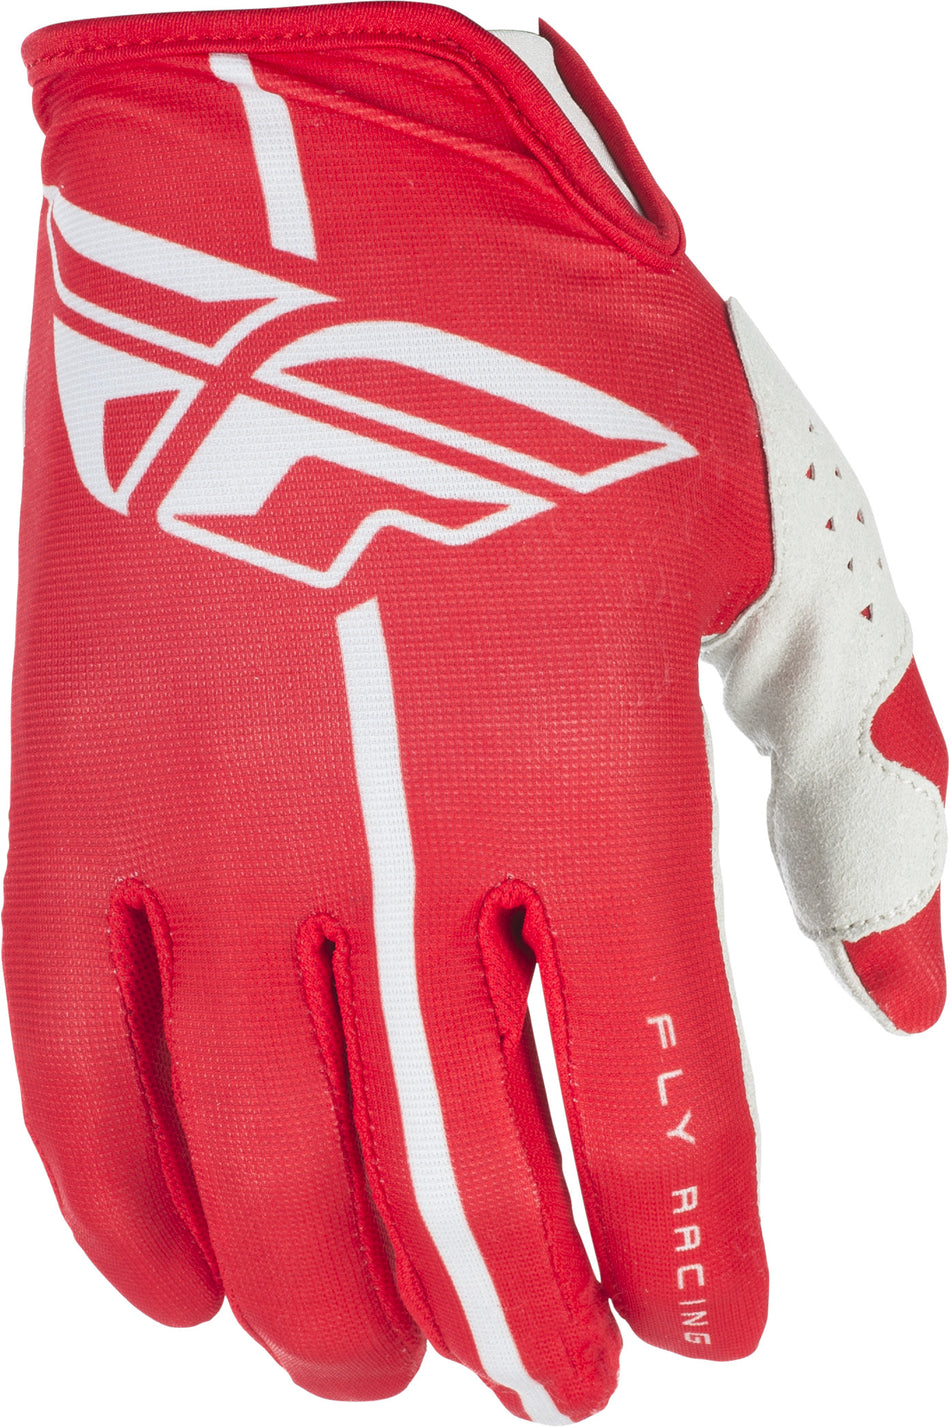 FLY RACING Lite Gloves Red/Grey Sz 12 371-01212